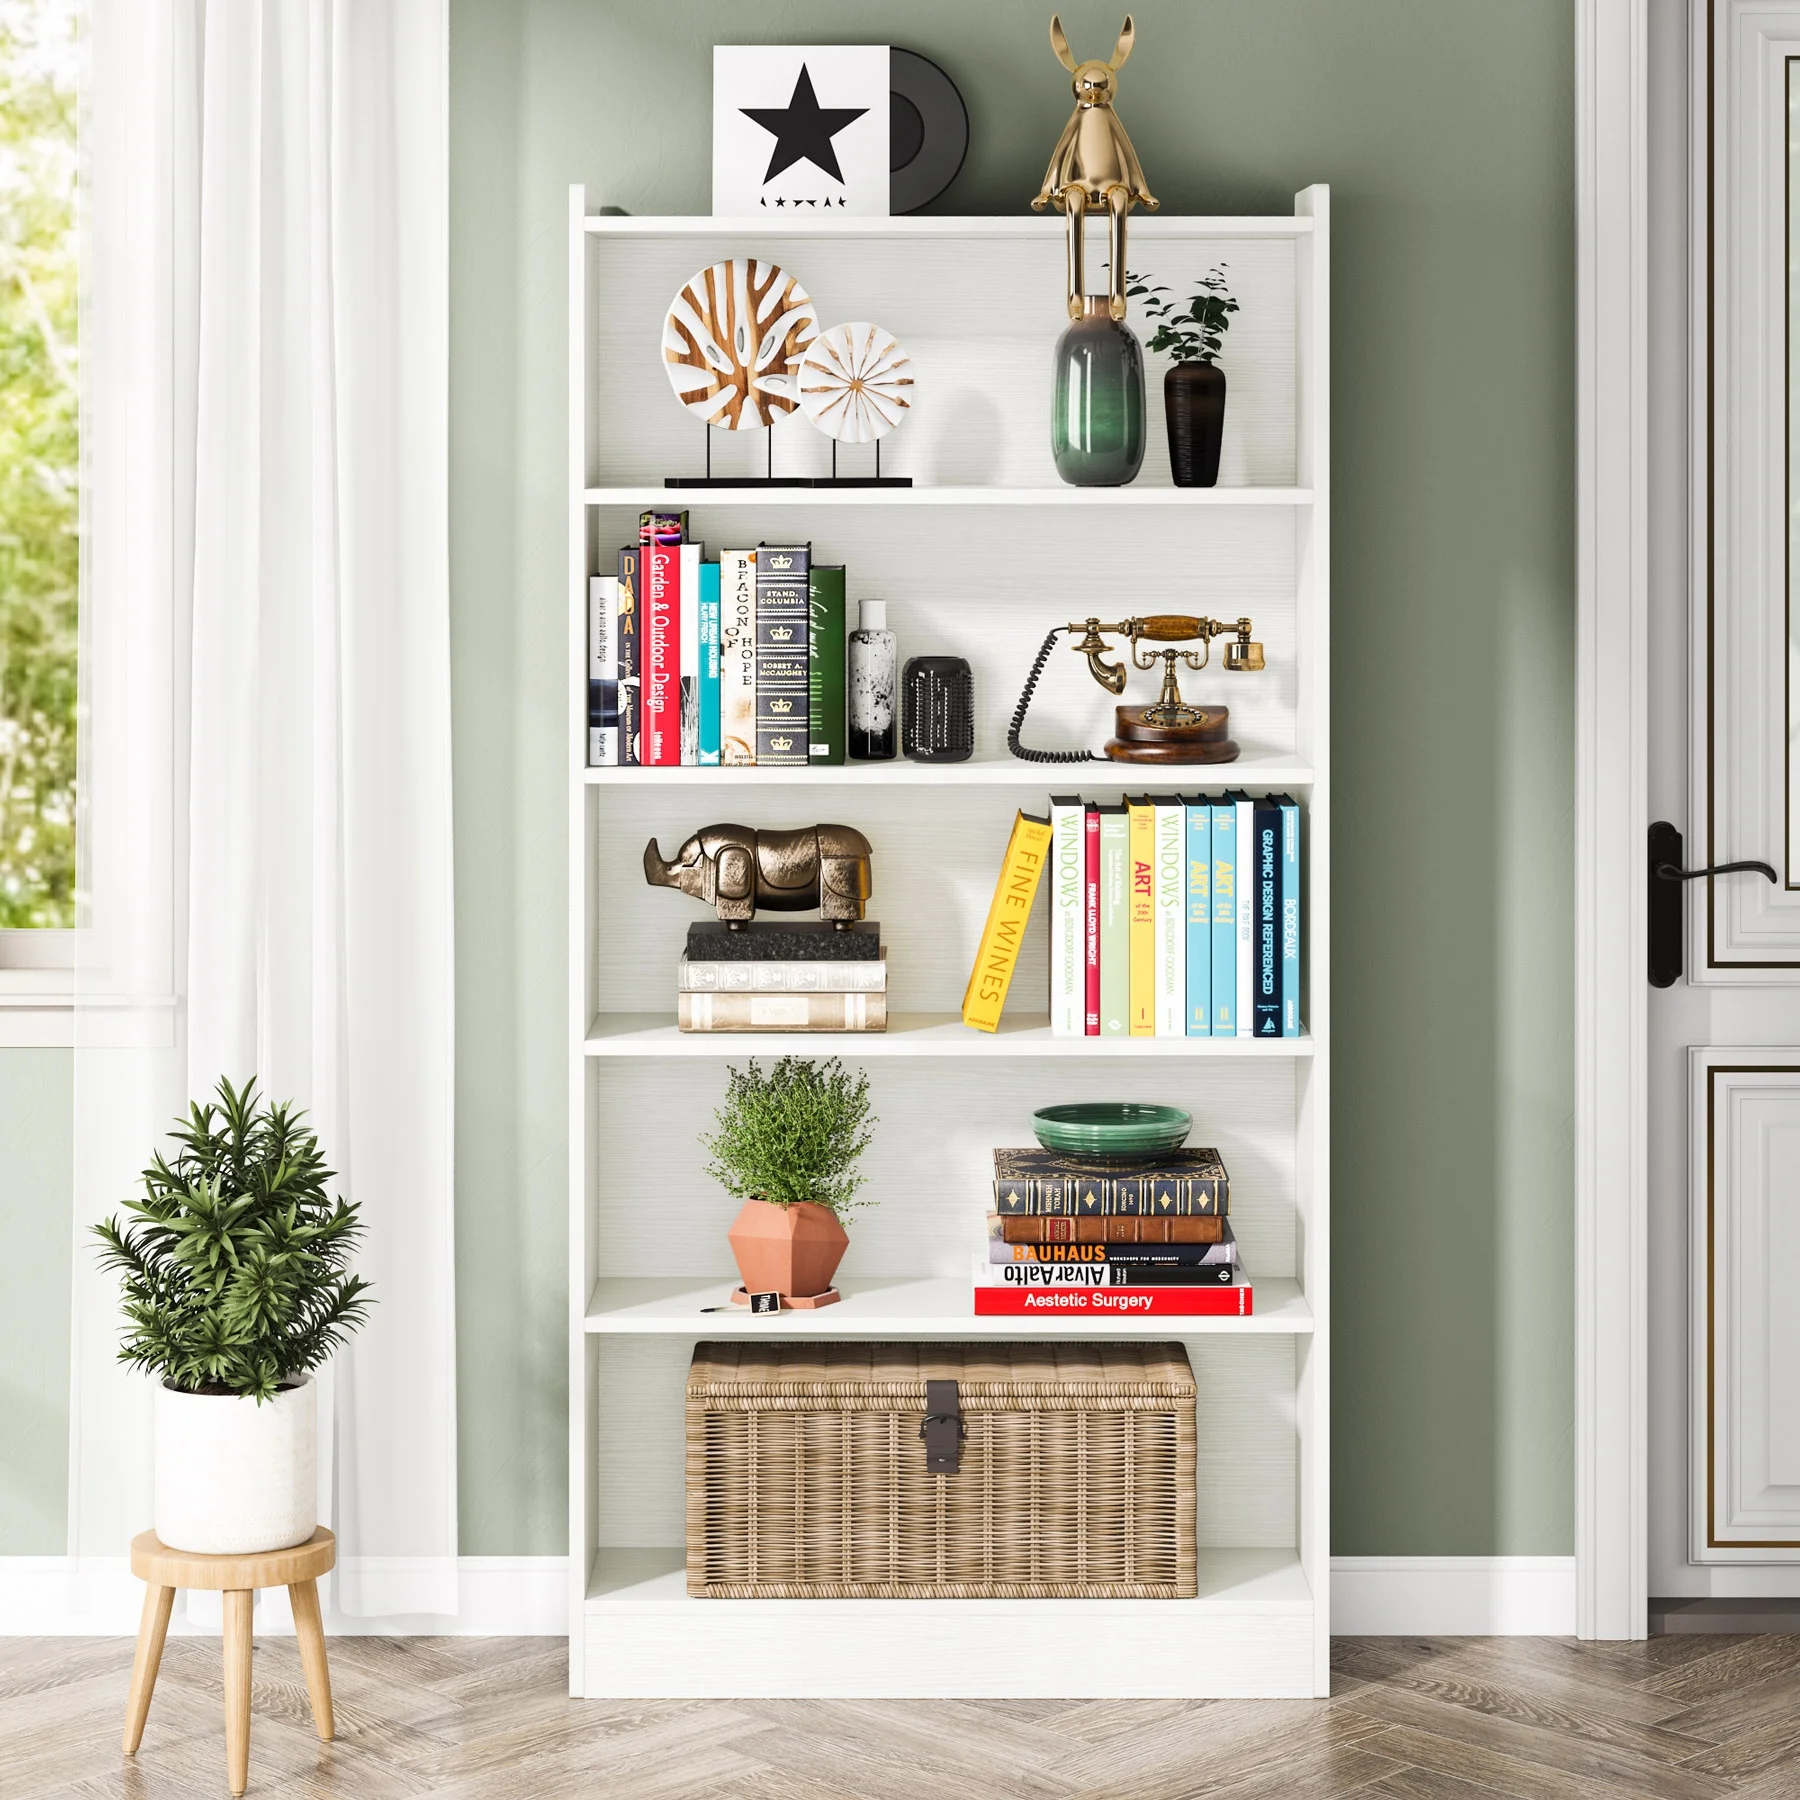 Tribesigns 72 inch Tall Bookcase White Library Bookshelf with Storage Shelves Large Open Bookcases Wood Display Shelving Unit